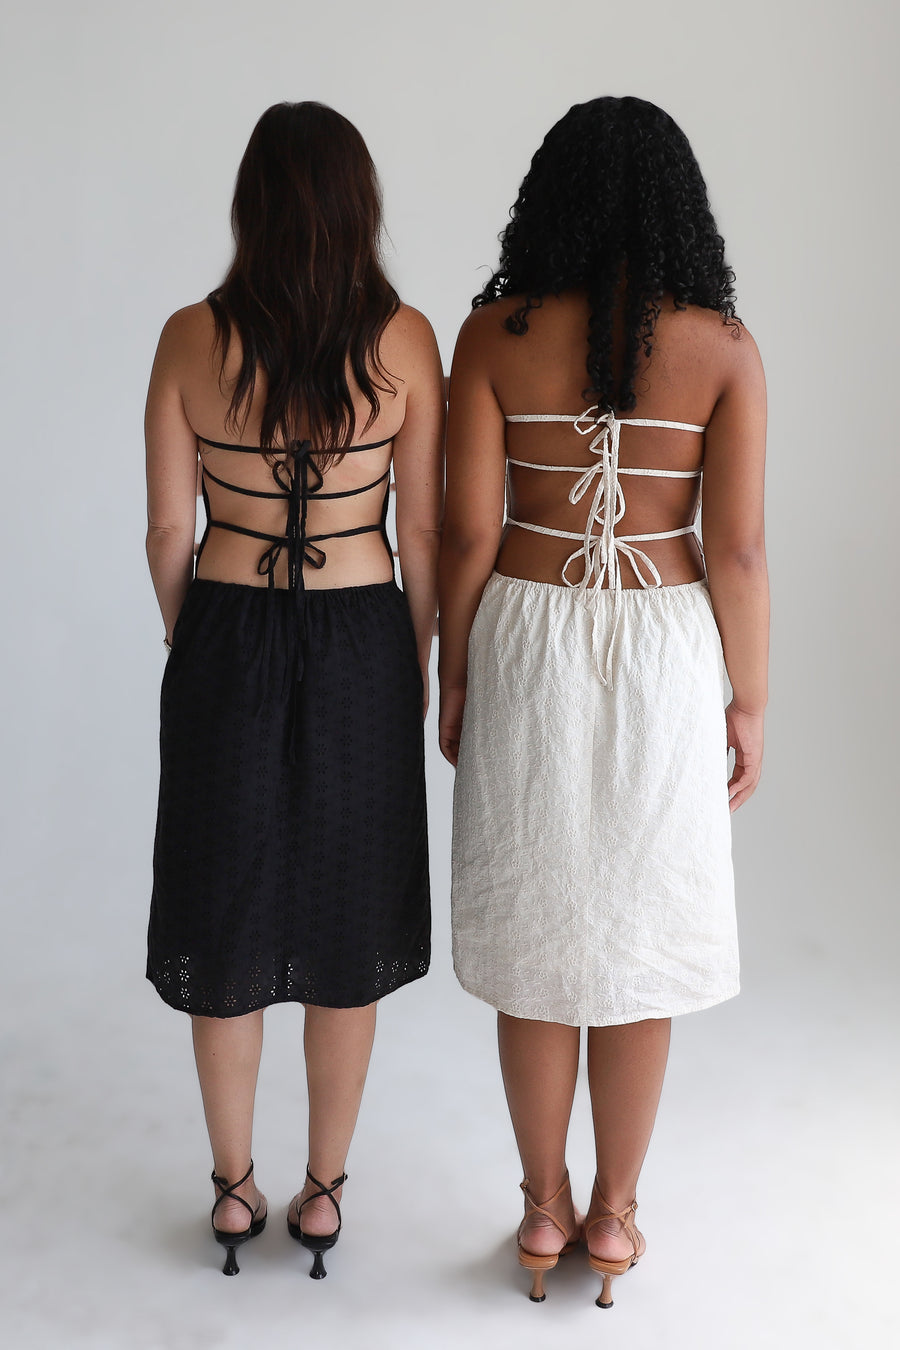 Two models showing the back of dresses.